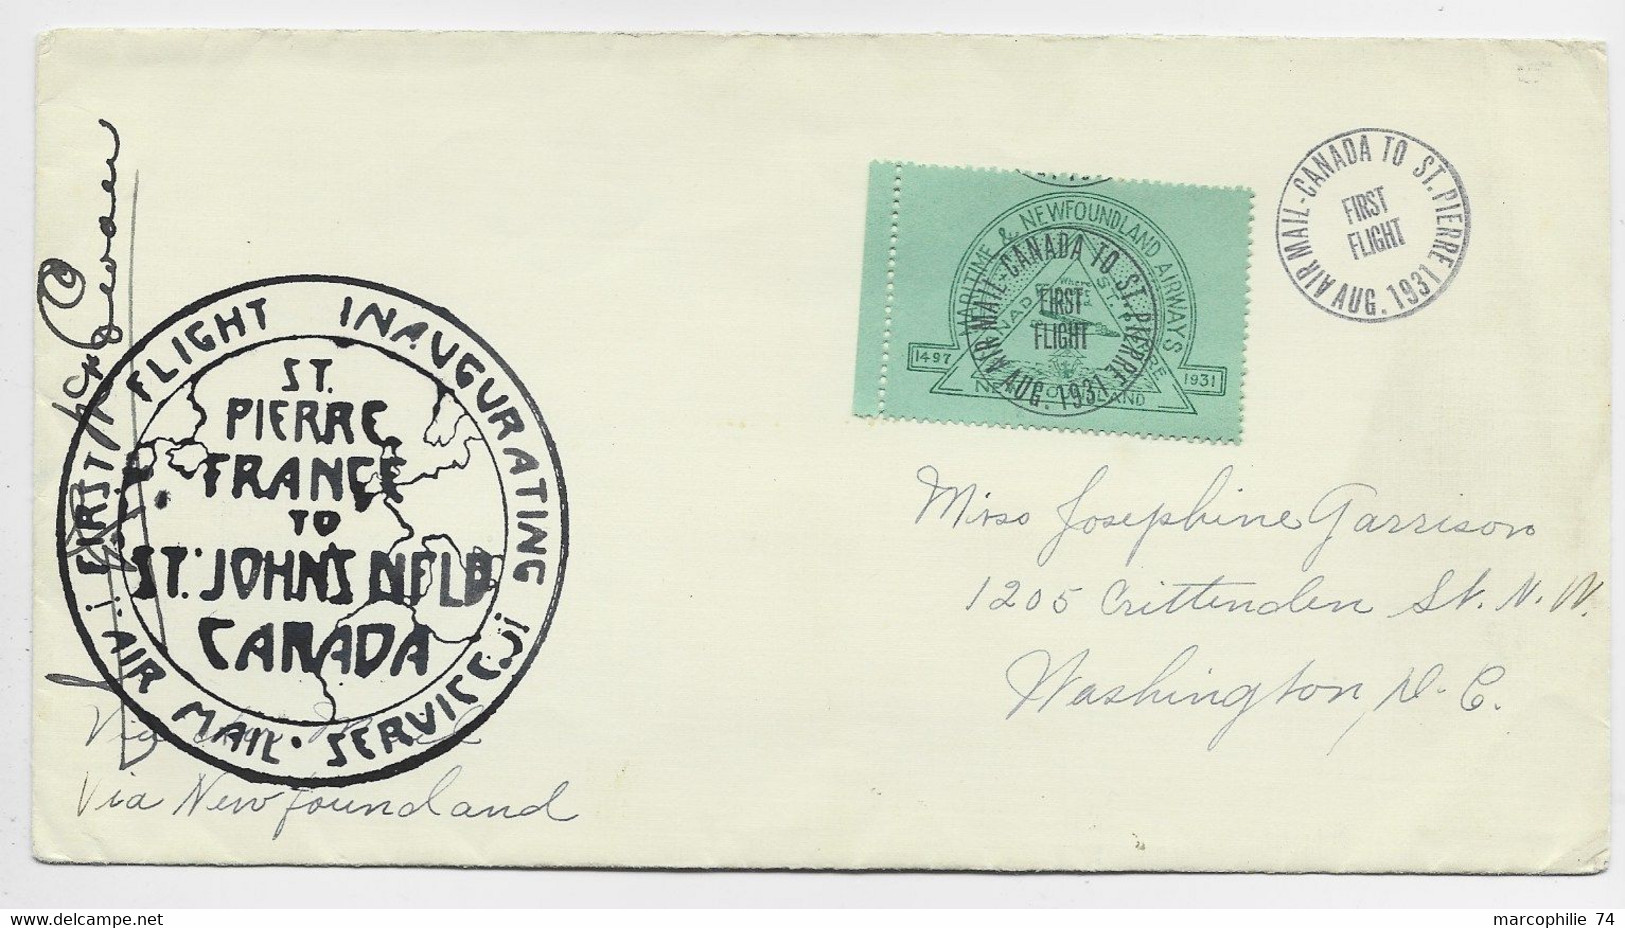 CANADA NEW FOUNLAND AIR WAYS ST PIERRE CANADA FIRST FLIGHT 1931 LETTRE COVER INAUGURATING TO USA + SIGNATURE PILOTE - Erst- U. Sonderflugbriefe